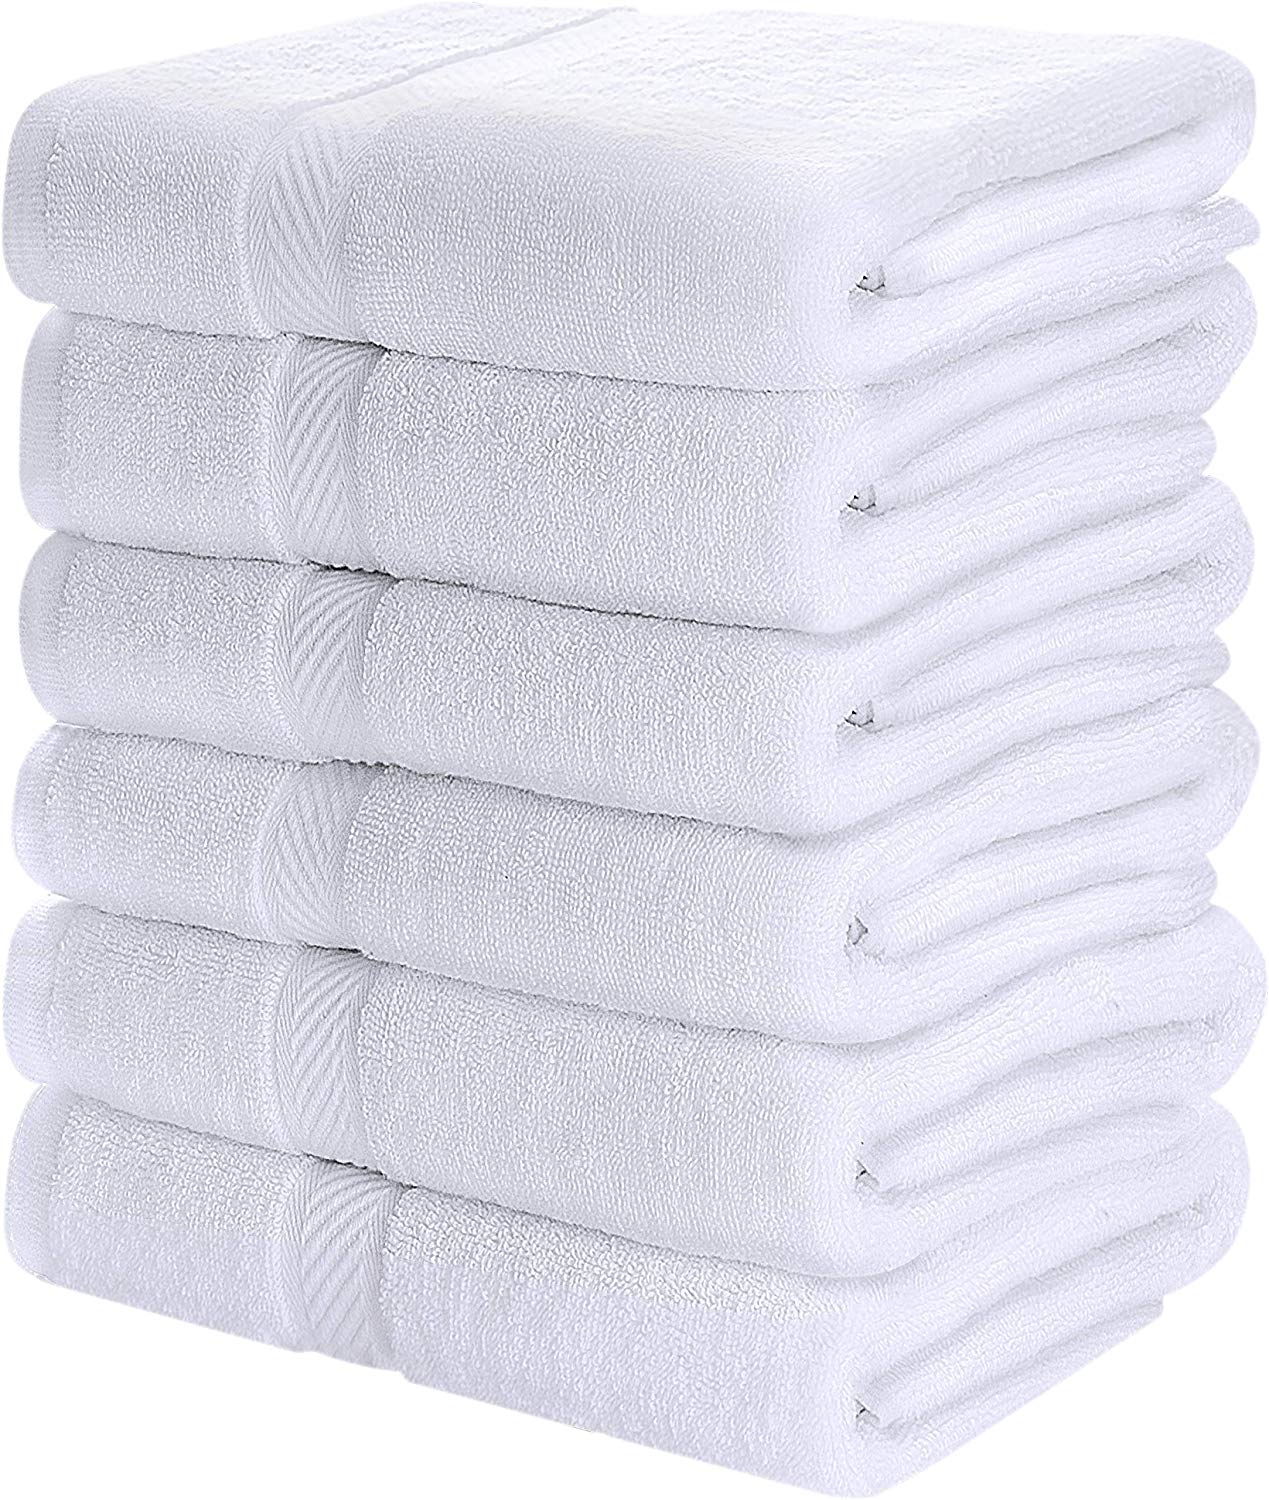 Utopia Towels Cotton Towels,White, 22 x 44 Inches Towels